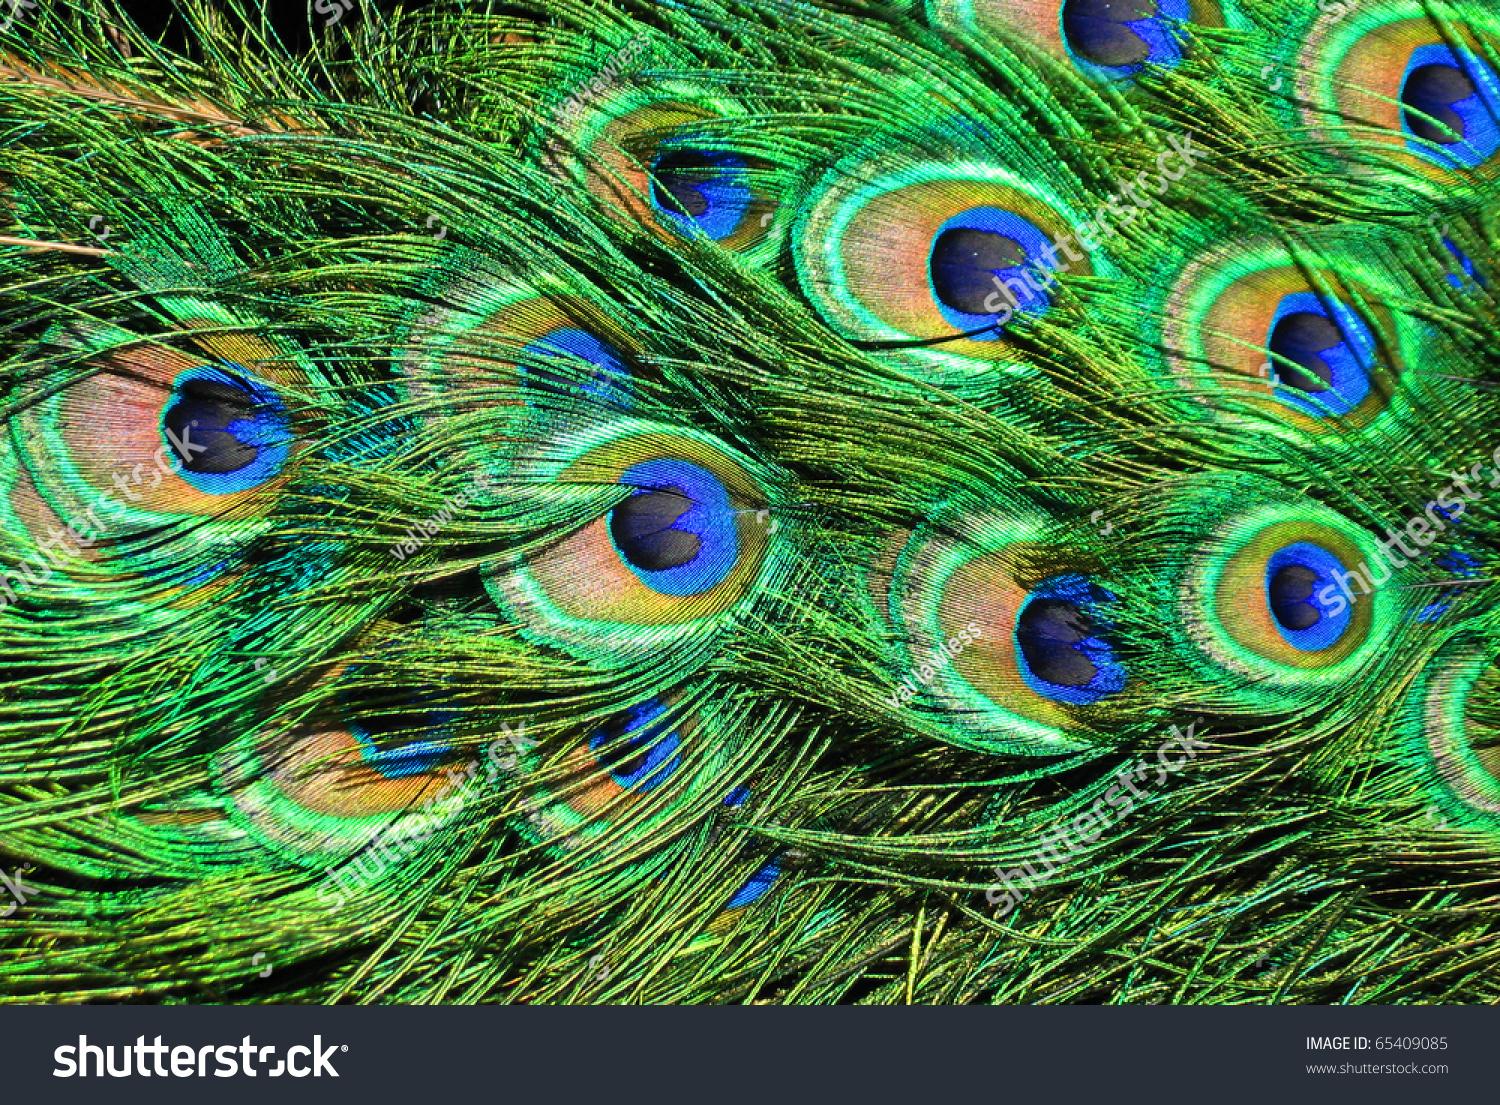 Peacock Feathers Stock Photo 65409085 : Shutterstock